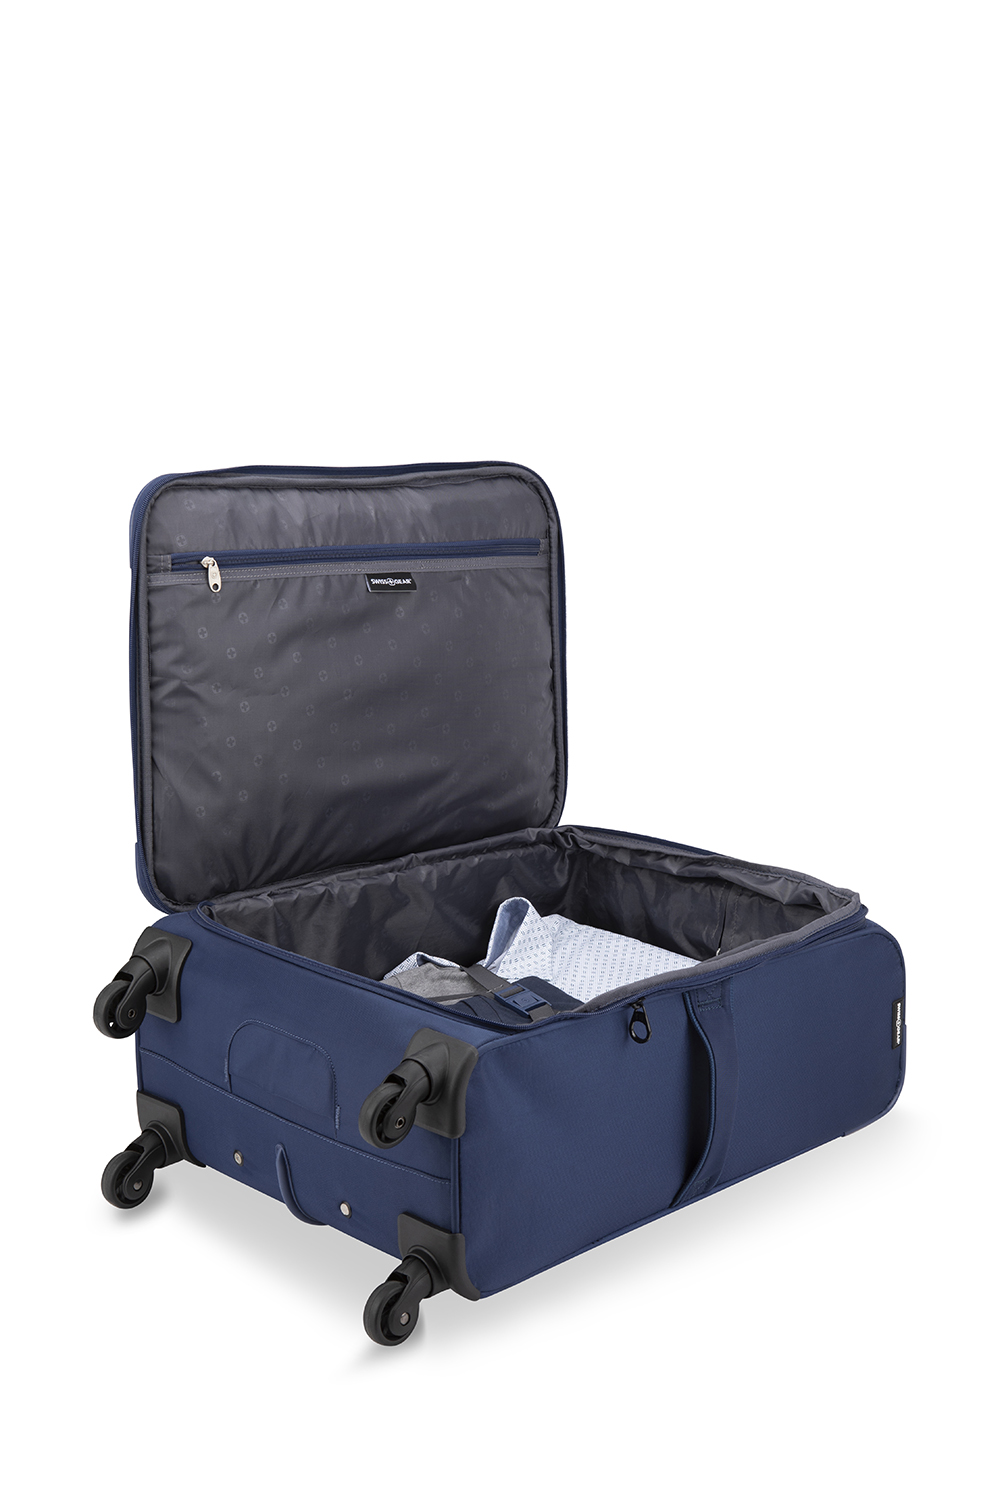 Swissgear NOUVEAU Collection 24 Expandable Upright Luggage - Navy